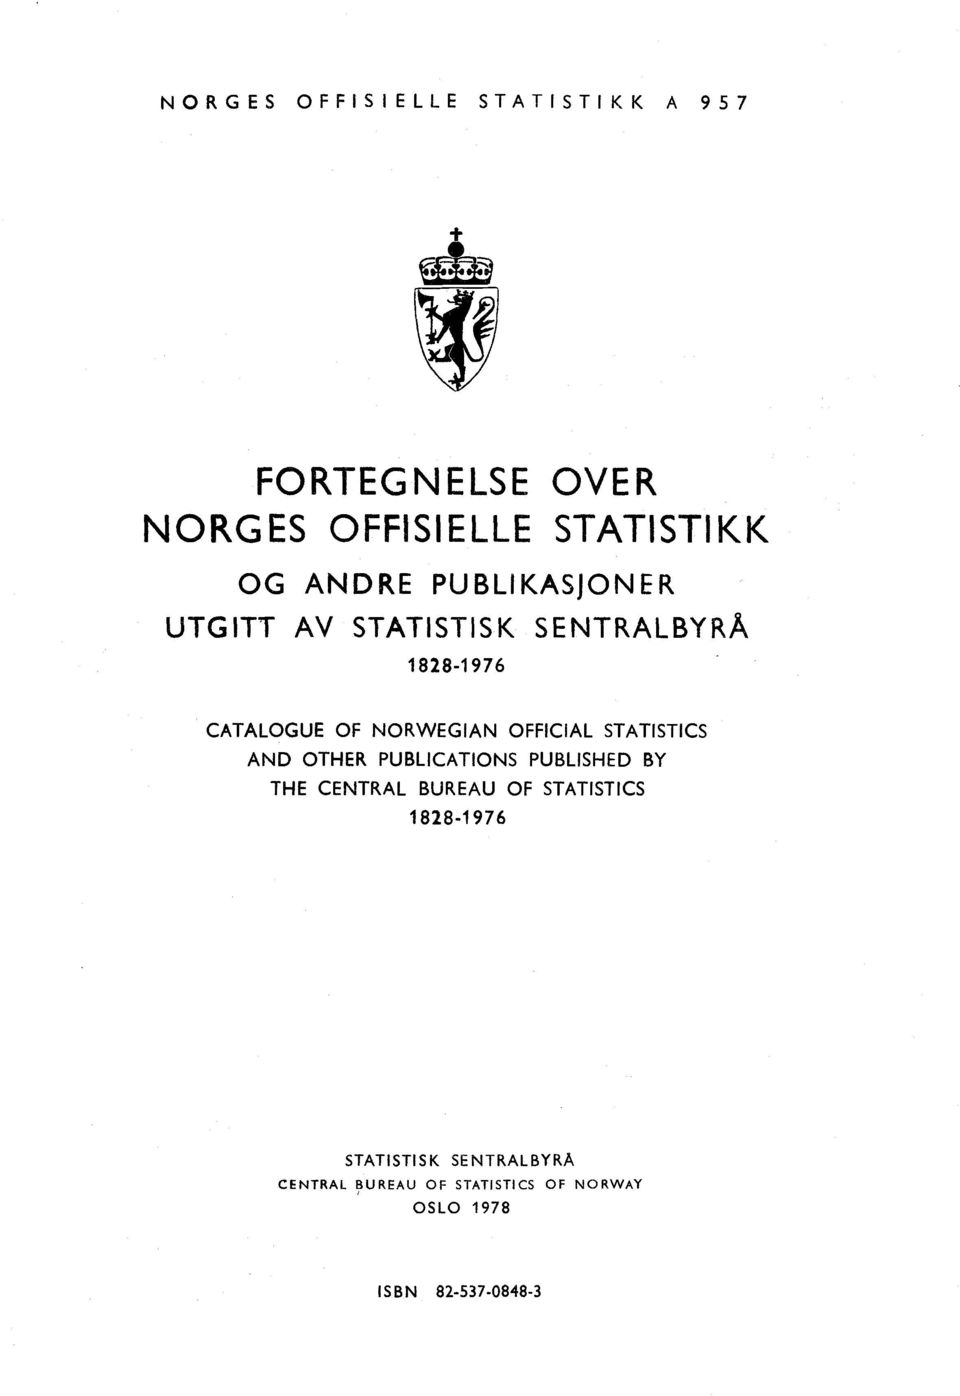 STATISTICS AND OTHER PUBLICATIONS PUBLISHED BY THE CENTRAL BUREAU OF STATISTICS 1828-1976